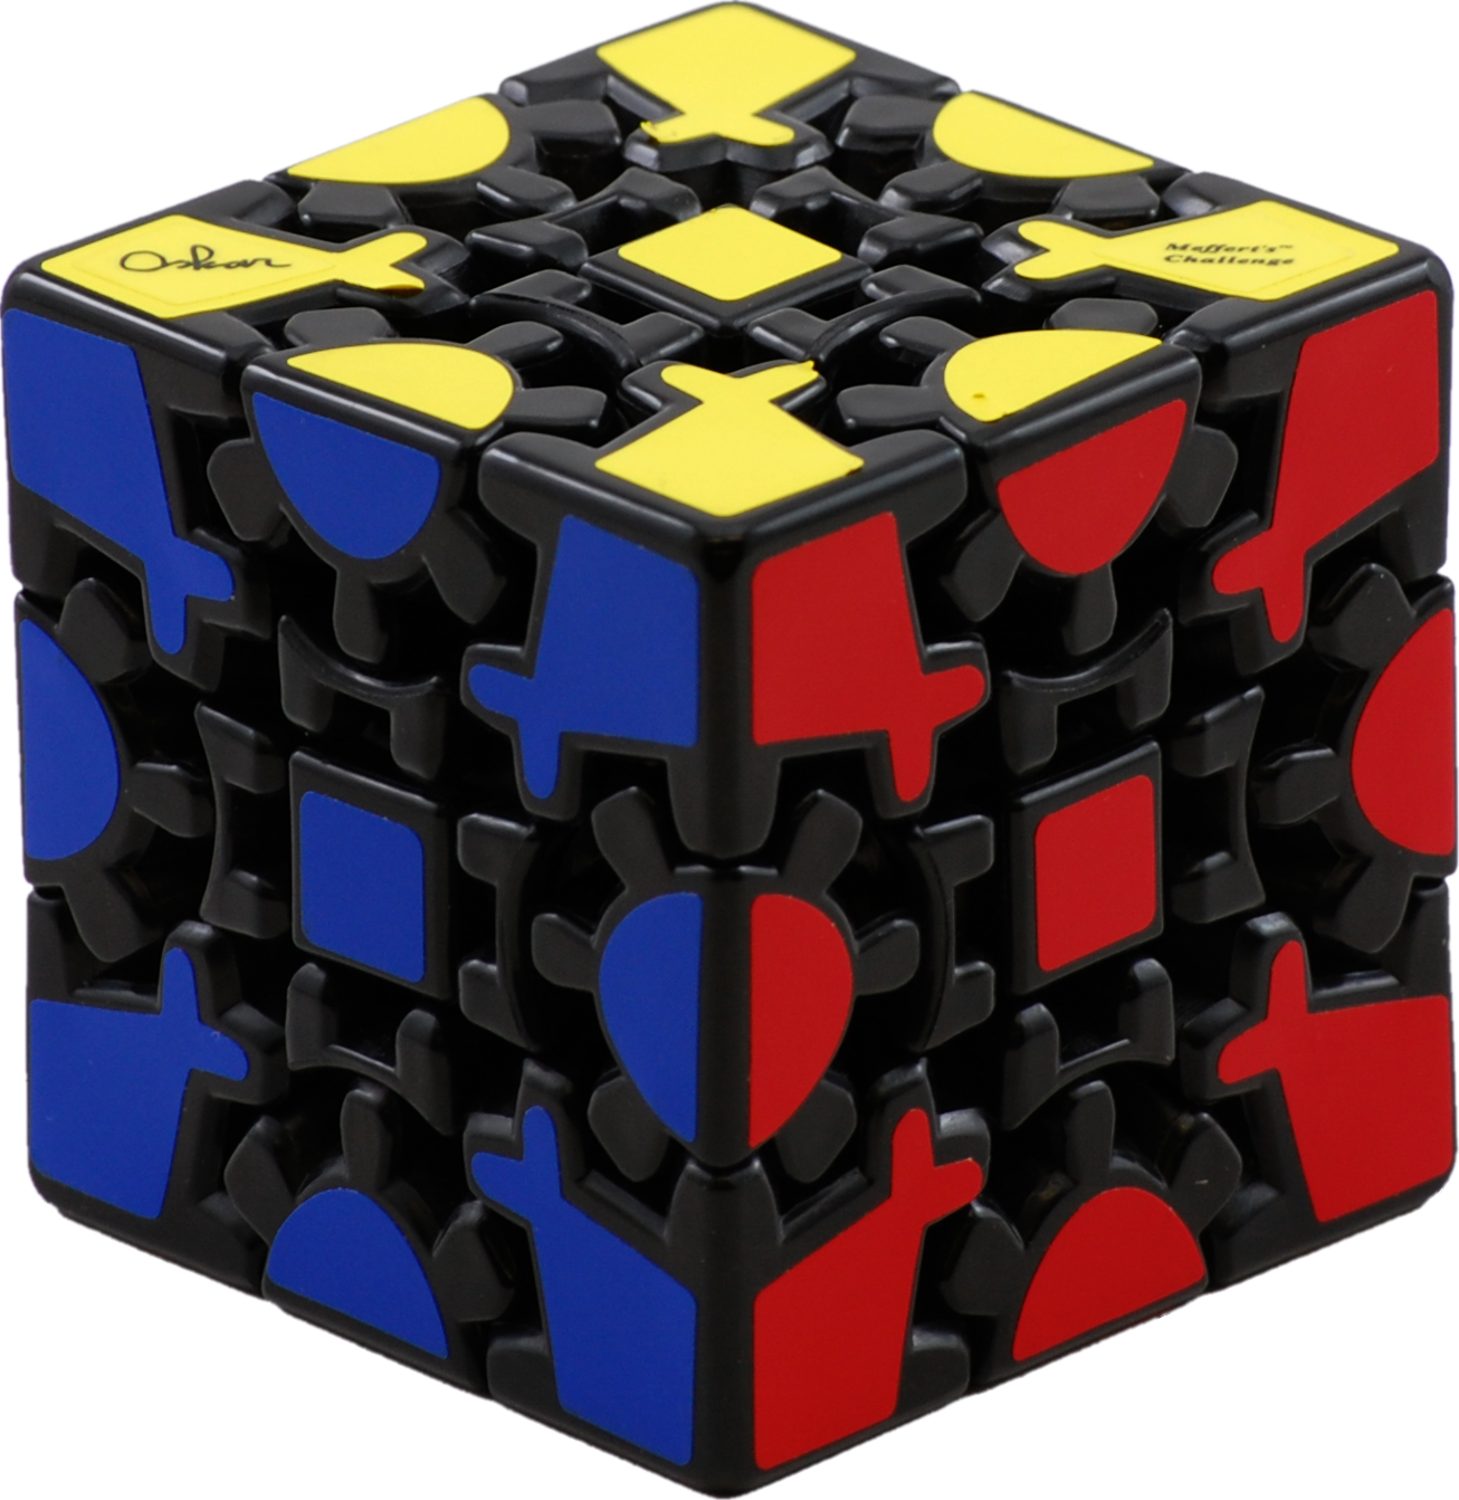 Gear Cube Puzzle Complexity